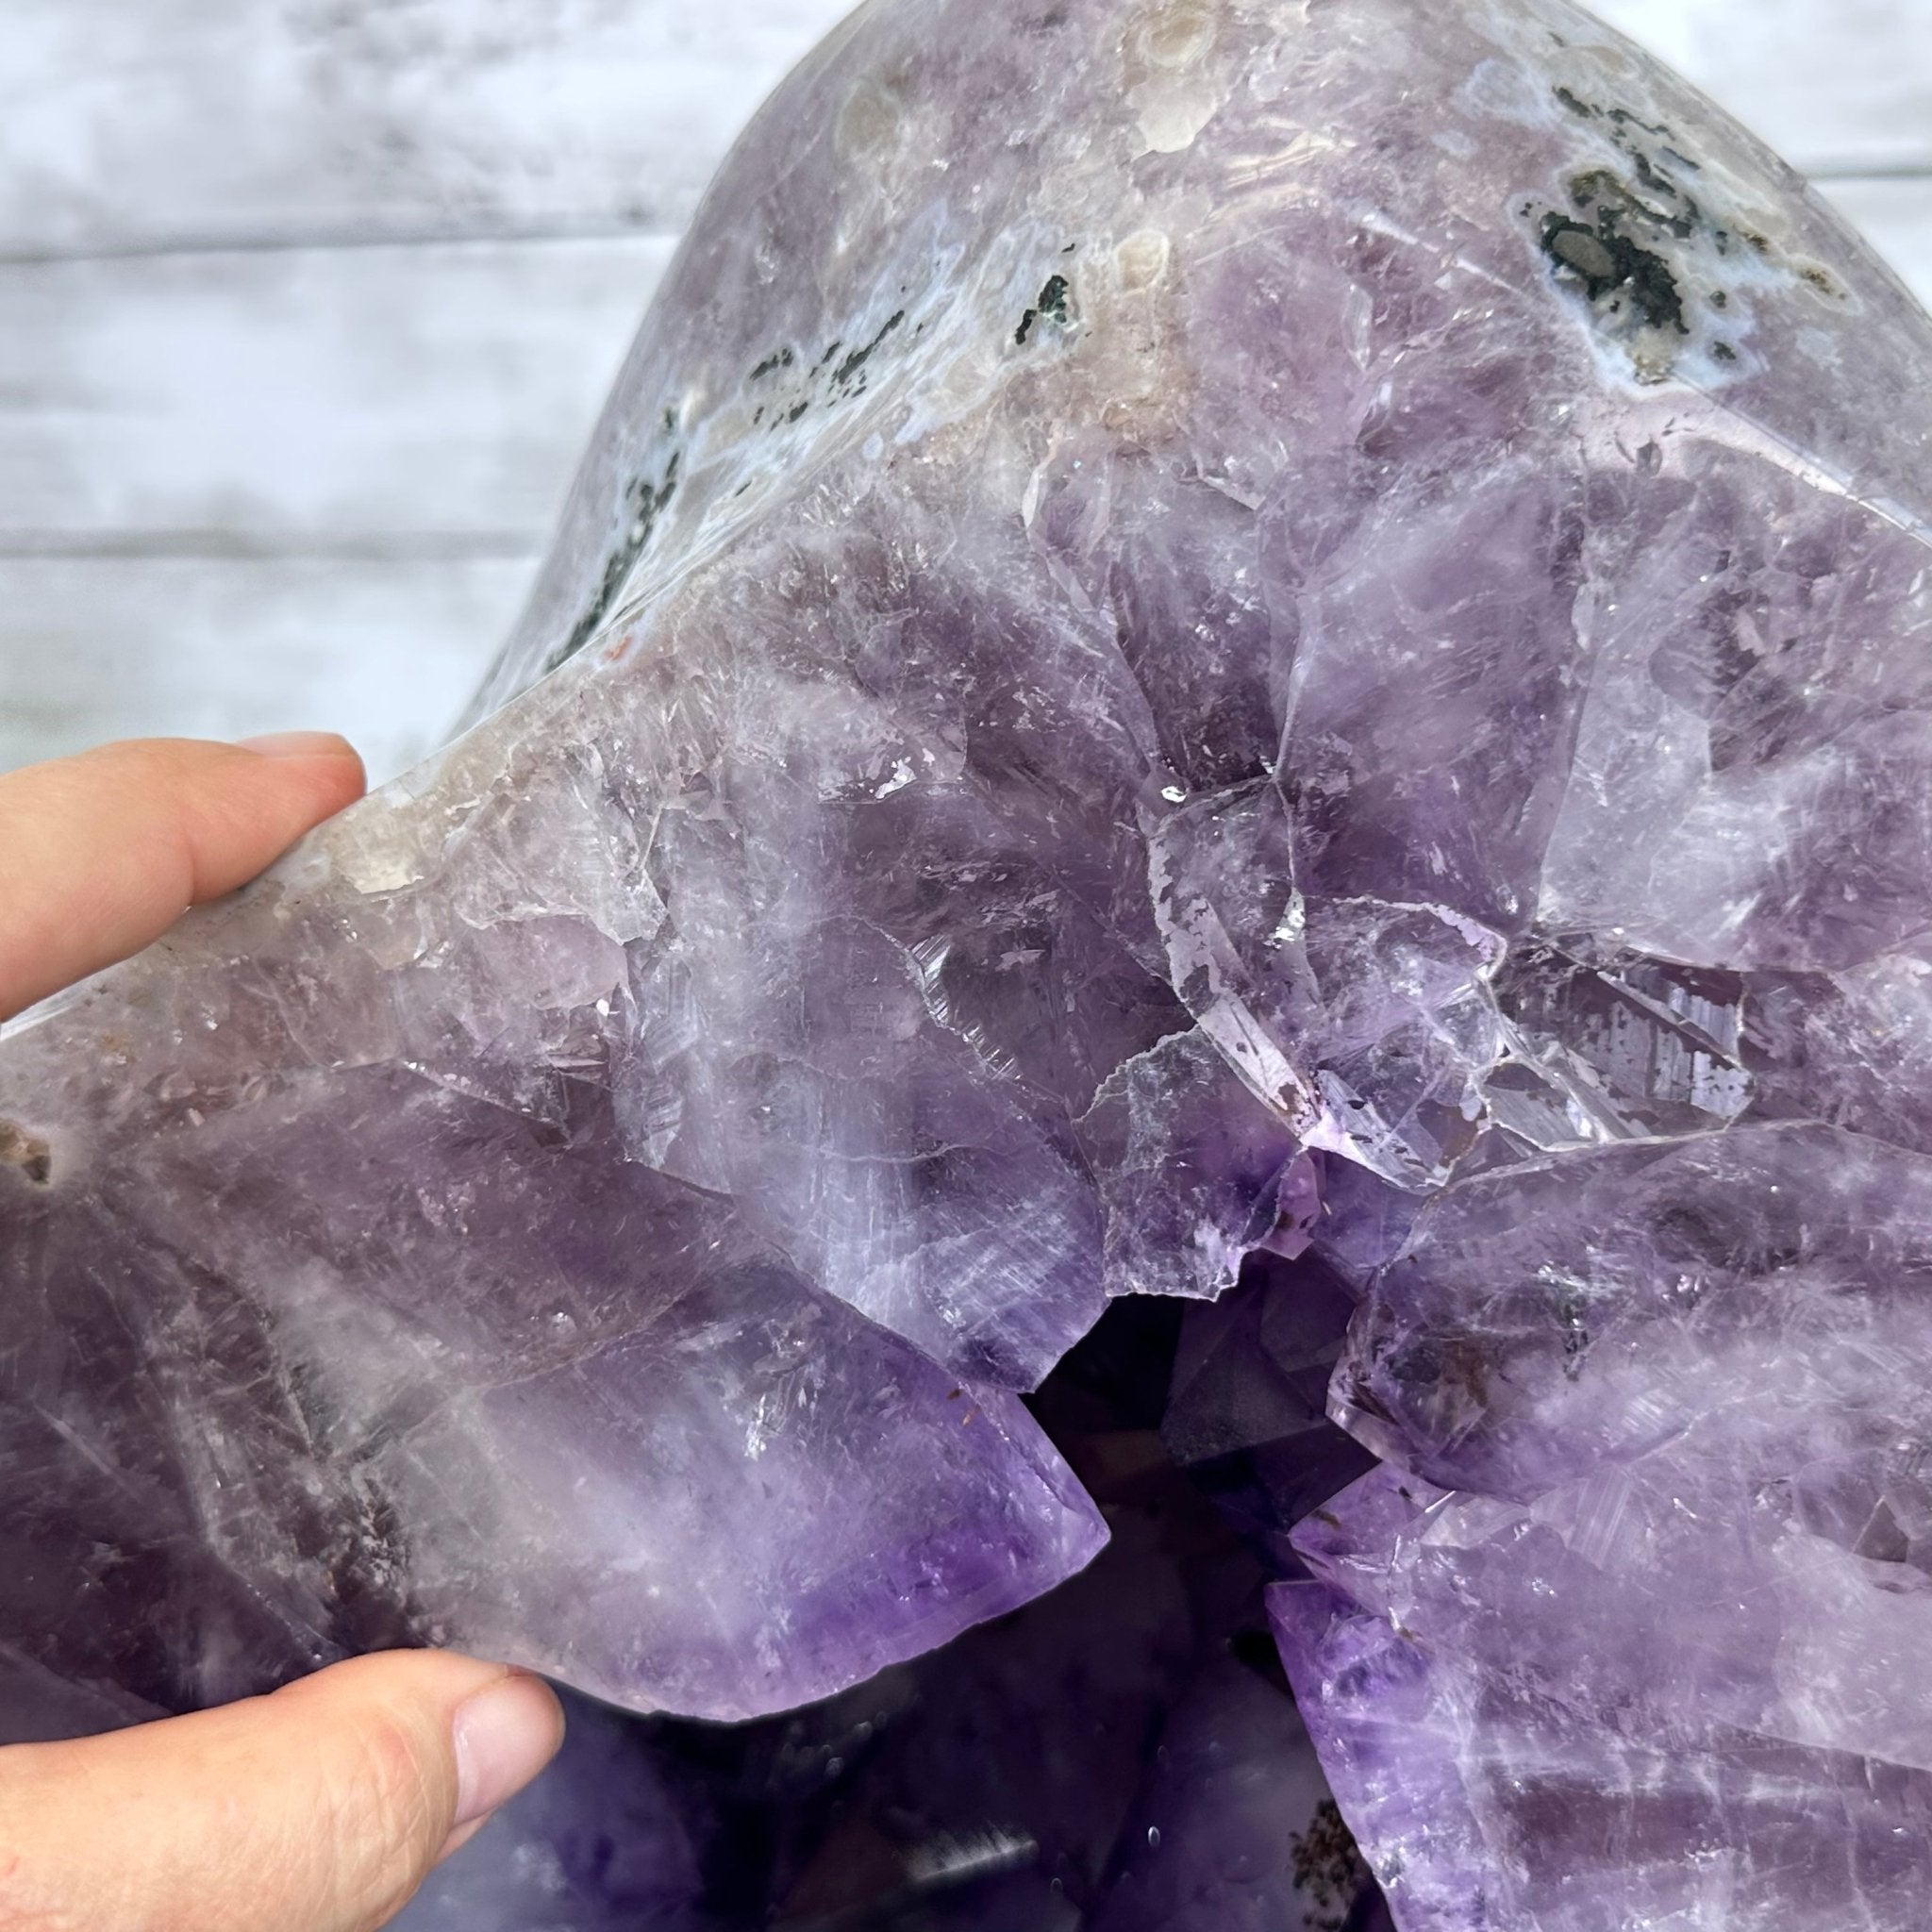 Extra Plus Quality Polished Brazilian Amethyst Cathedral, 161.3 lbs & 24.75" tall Model #5602-0047 by Brazil Gems - Brazil GemsBrazil GemsExtra Plus Quality Polished Brazilian Amethyst Cathedral, 161.3 lbs & 24.75" tall Model #5602-0047 by Brazil GemsPolished Cathedrals5602-0047